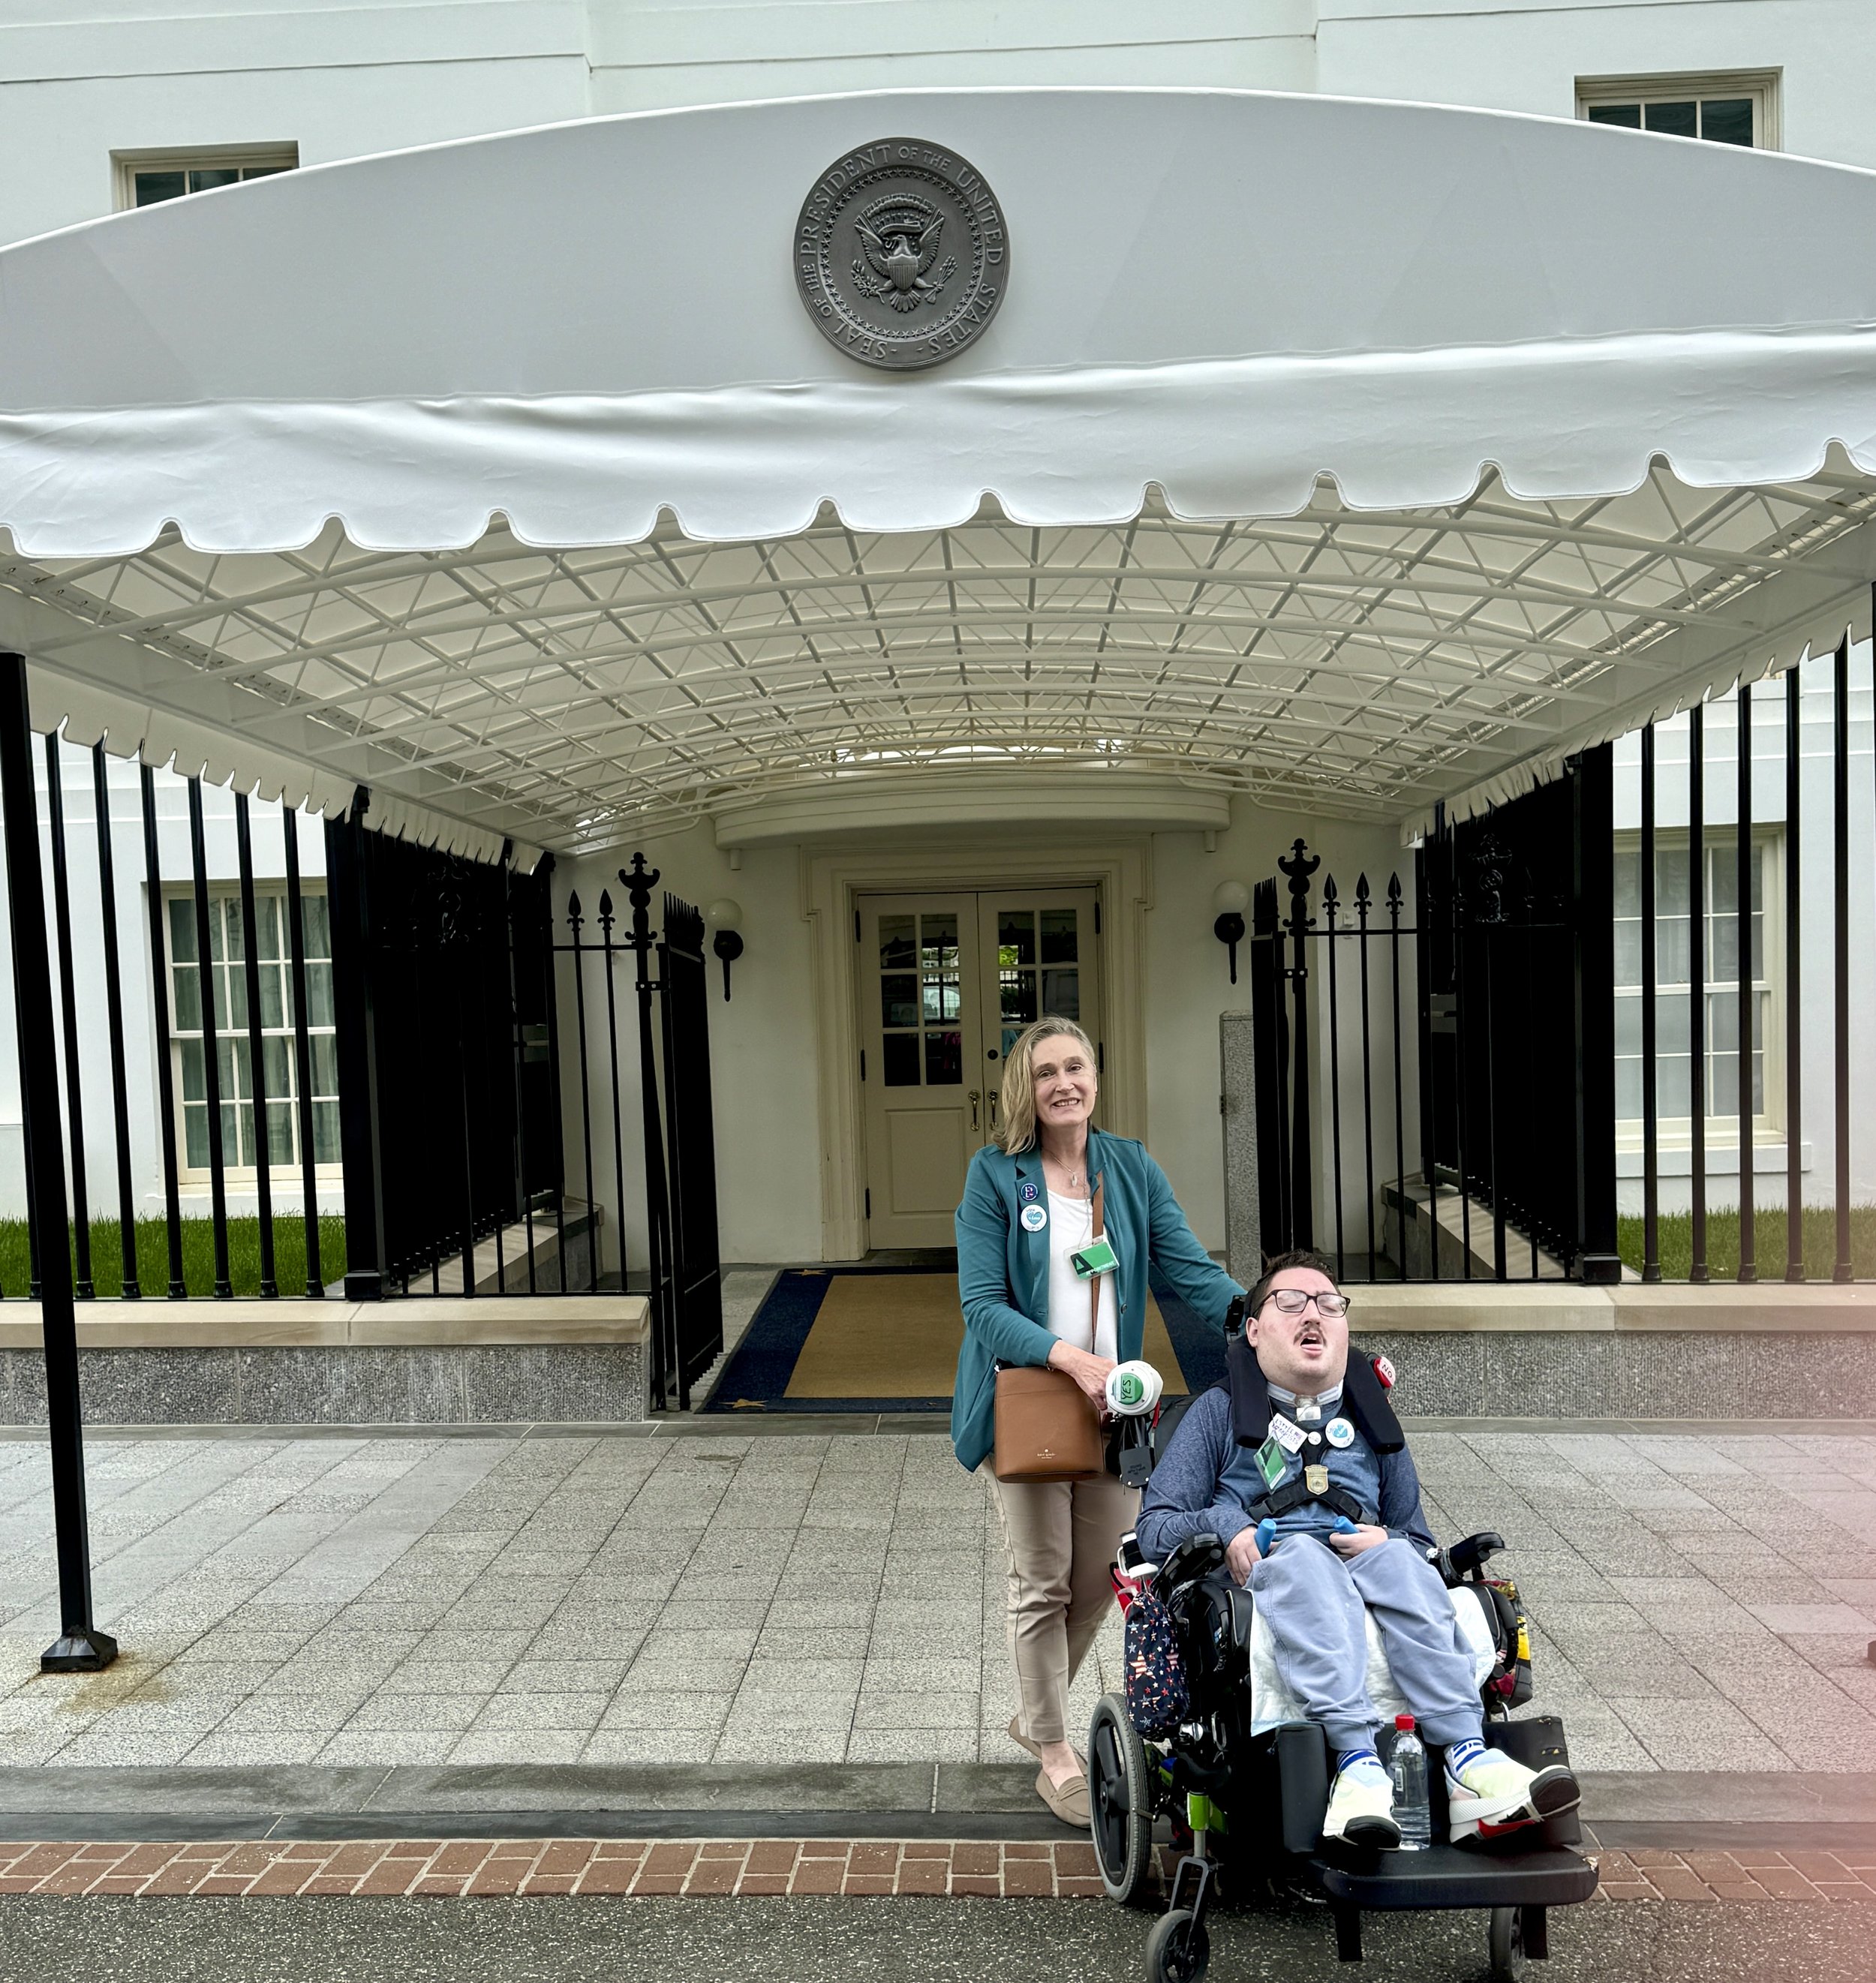  Rob and Jeneva pose outside the White House, under a white arrival canopy with the presidential seal. 